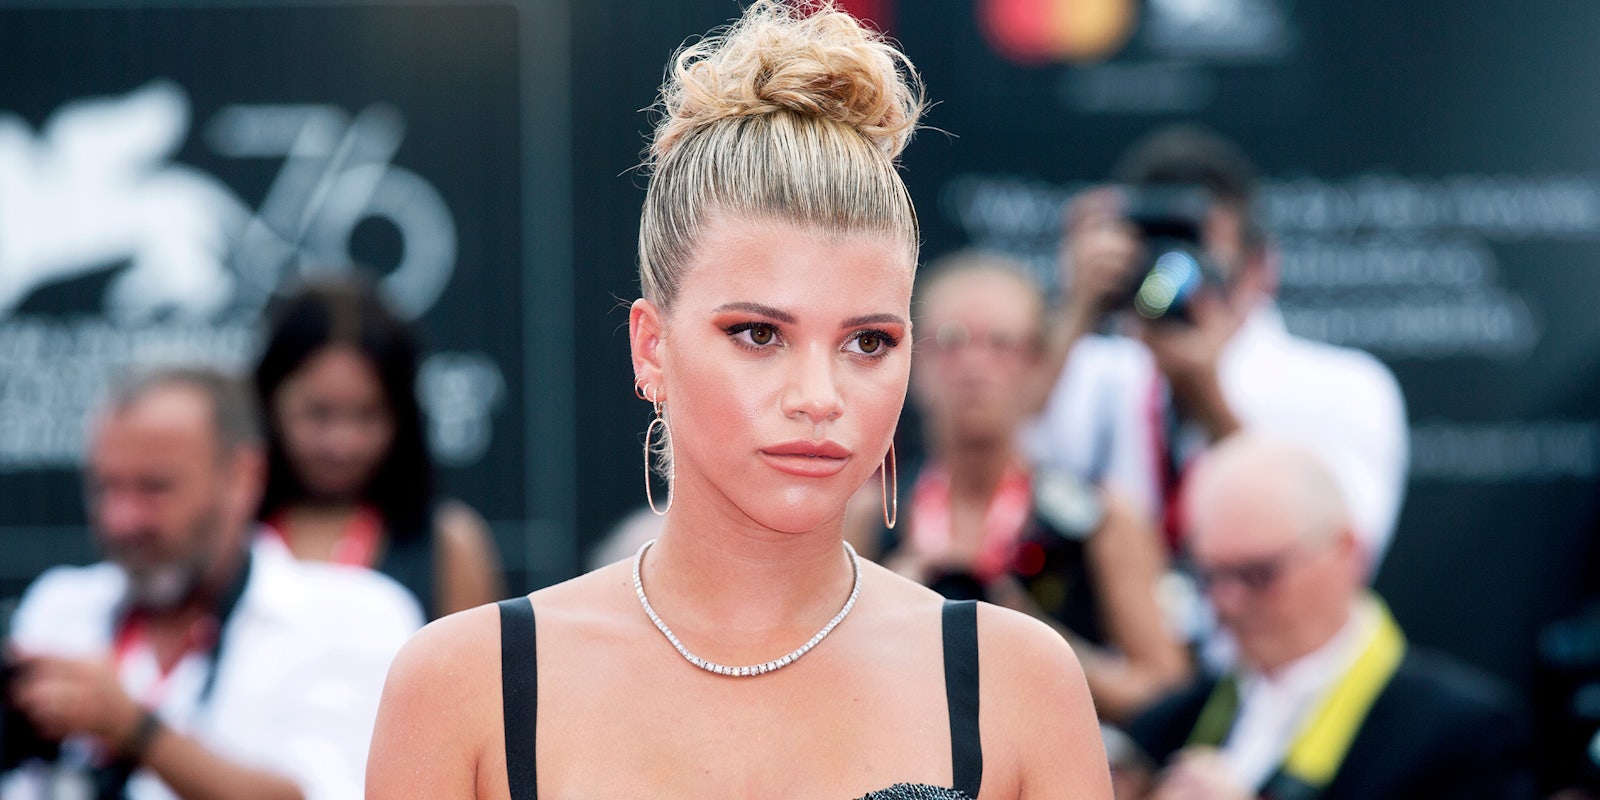 Photo of Sofia Richie at the red carpet